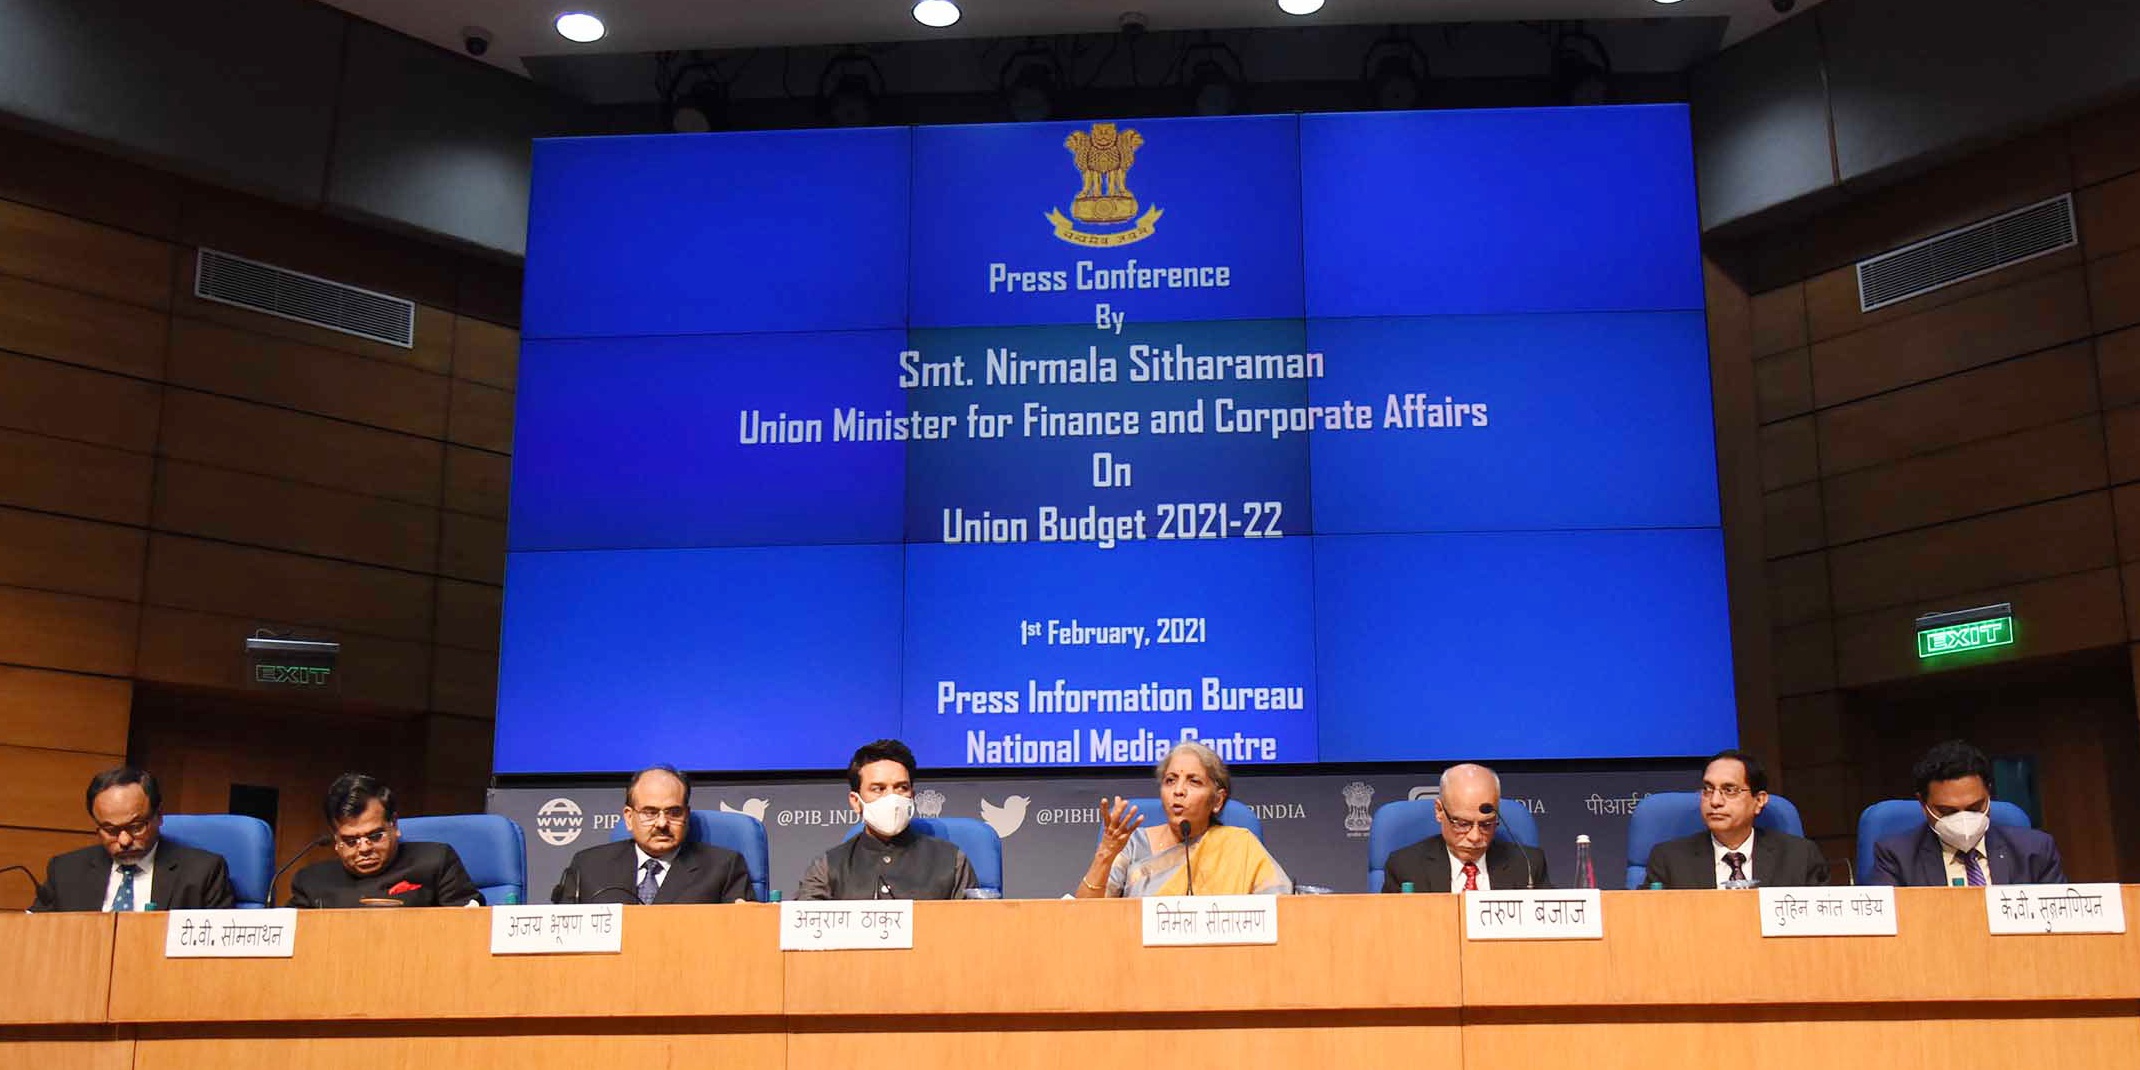 image depicting Key points of the Union Budget 2021